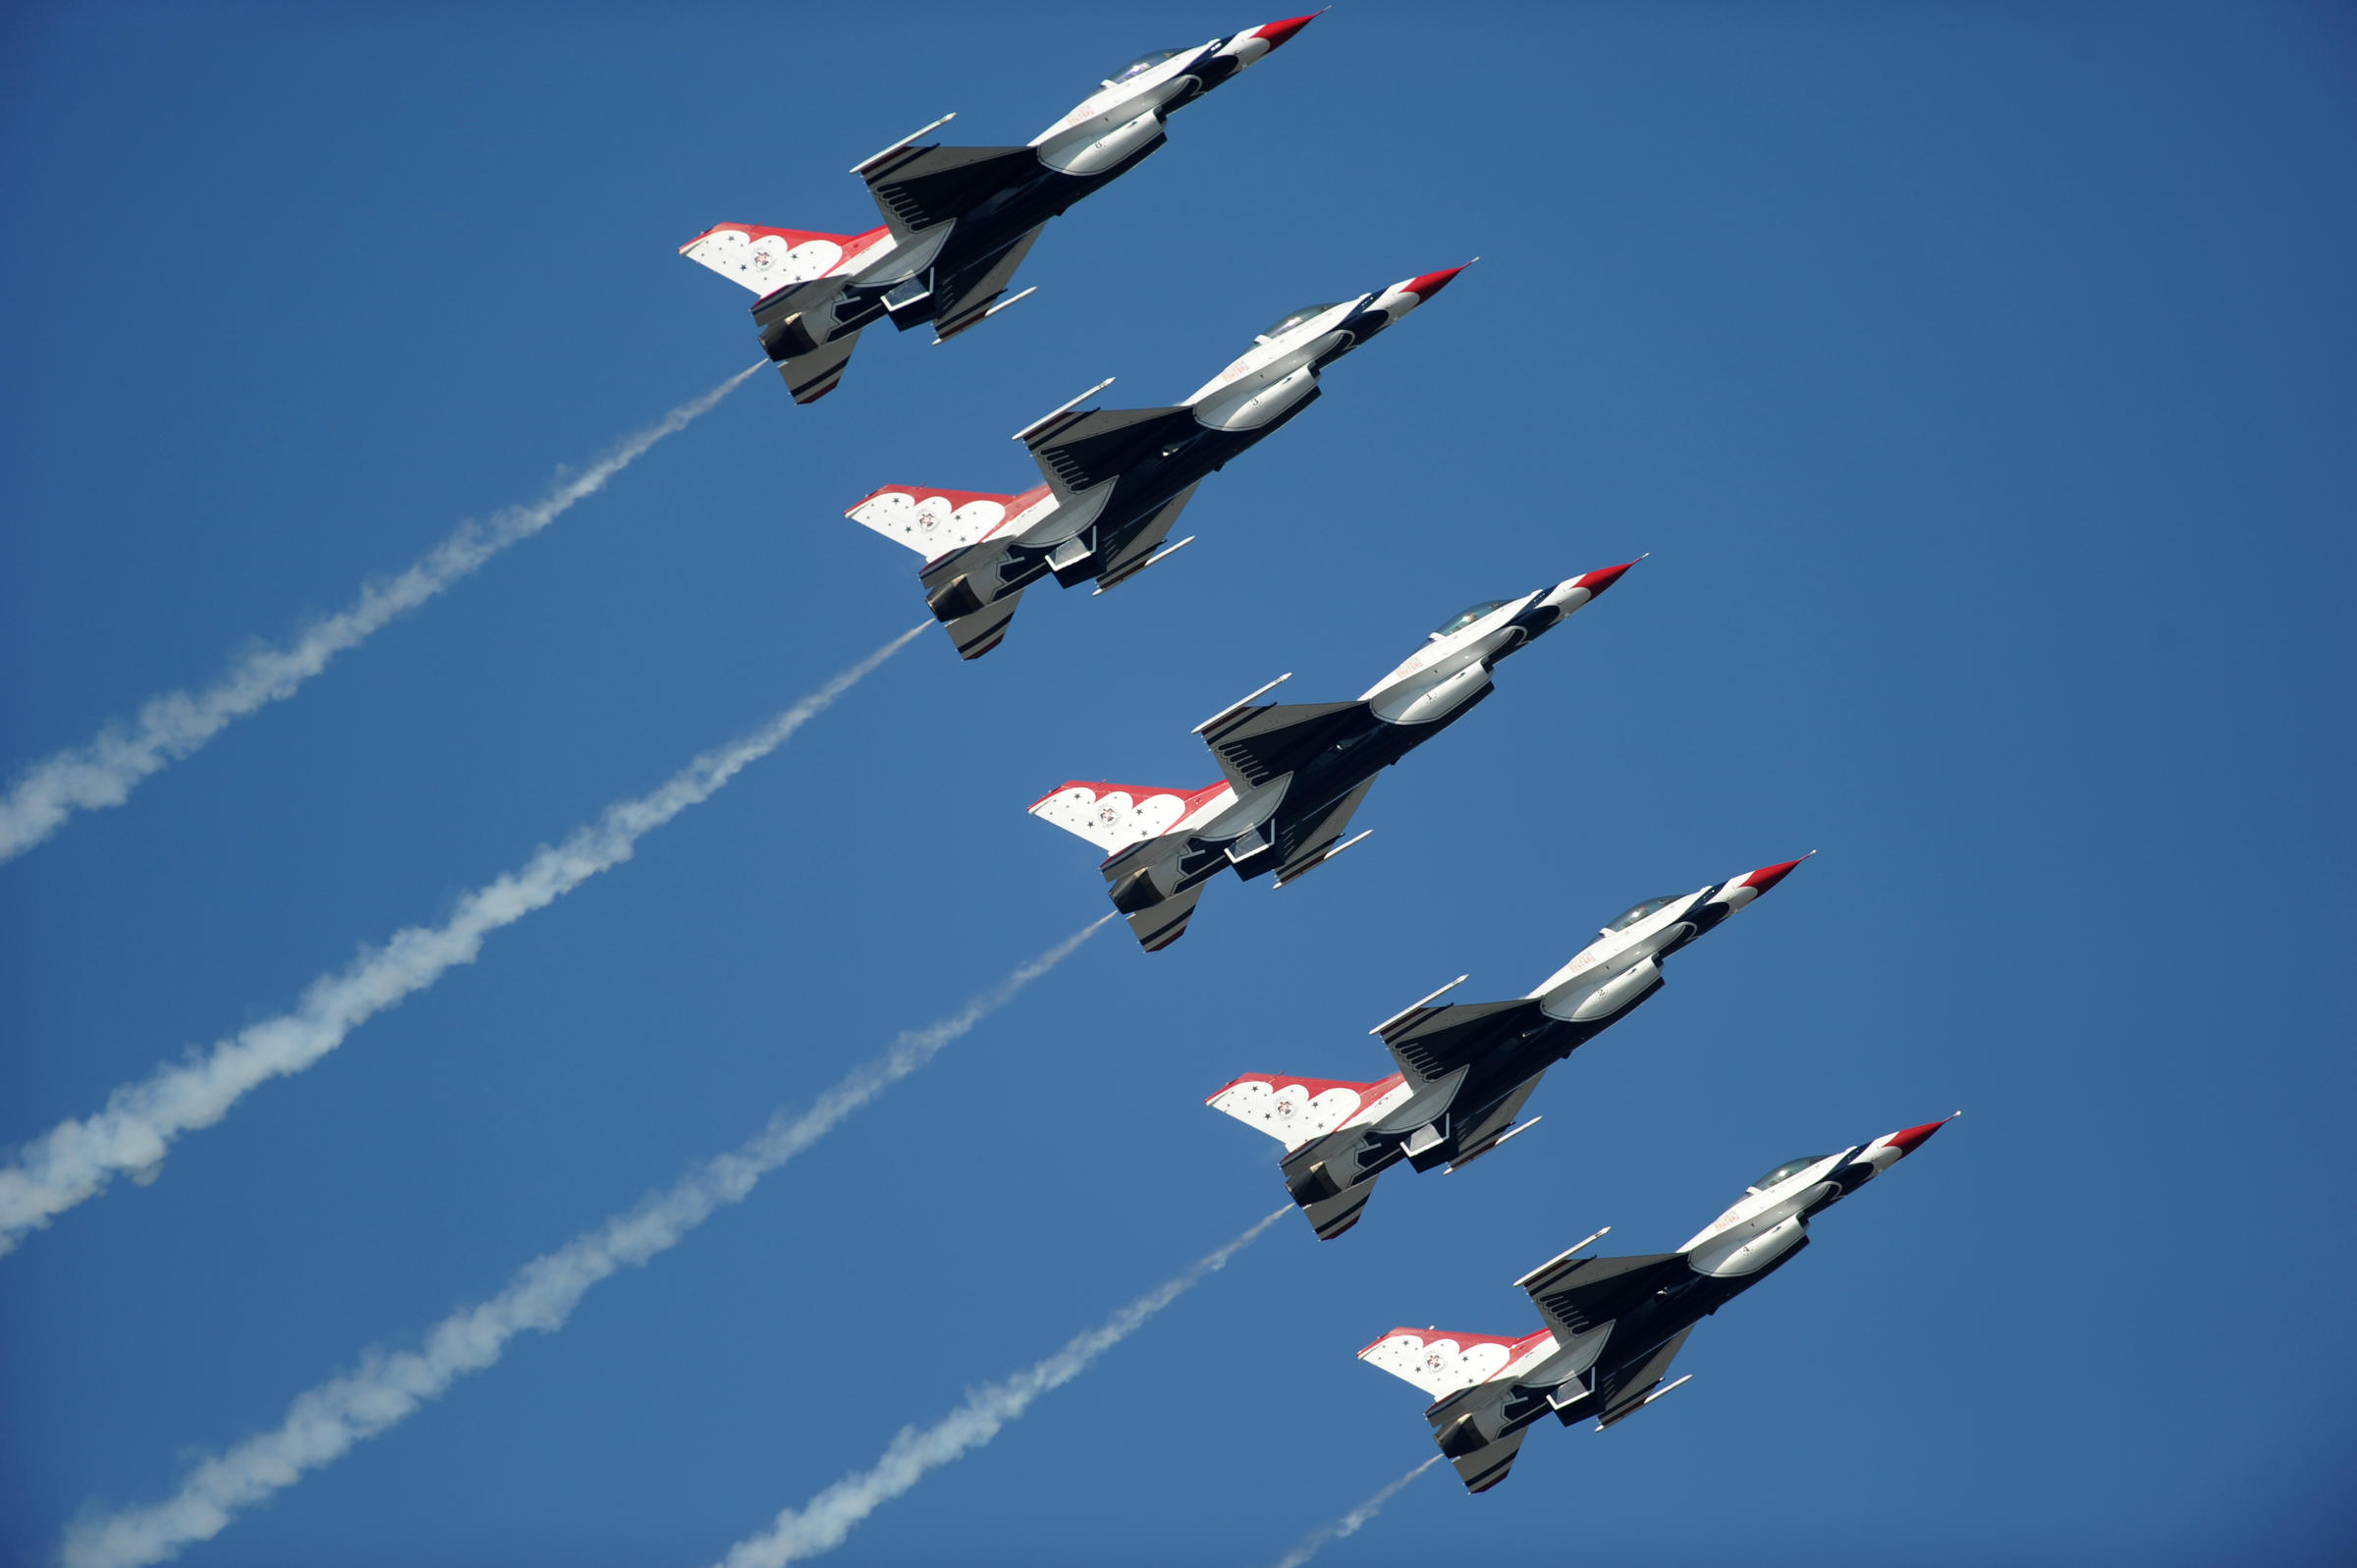 McConnell AFB Plans To Resume Hosting Air Show | KMUW